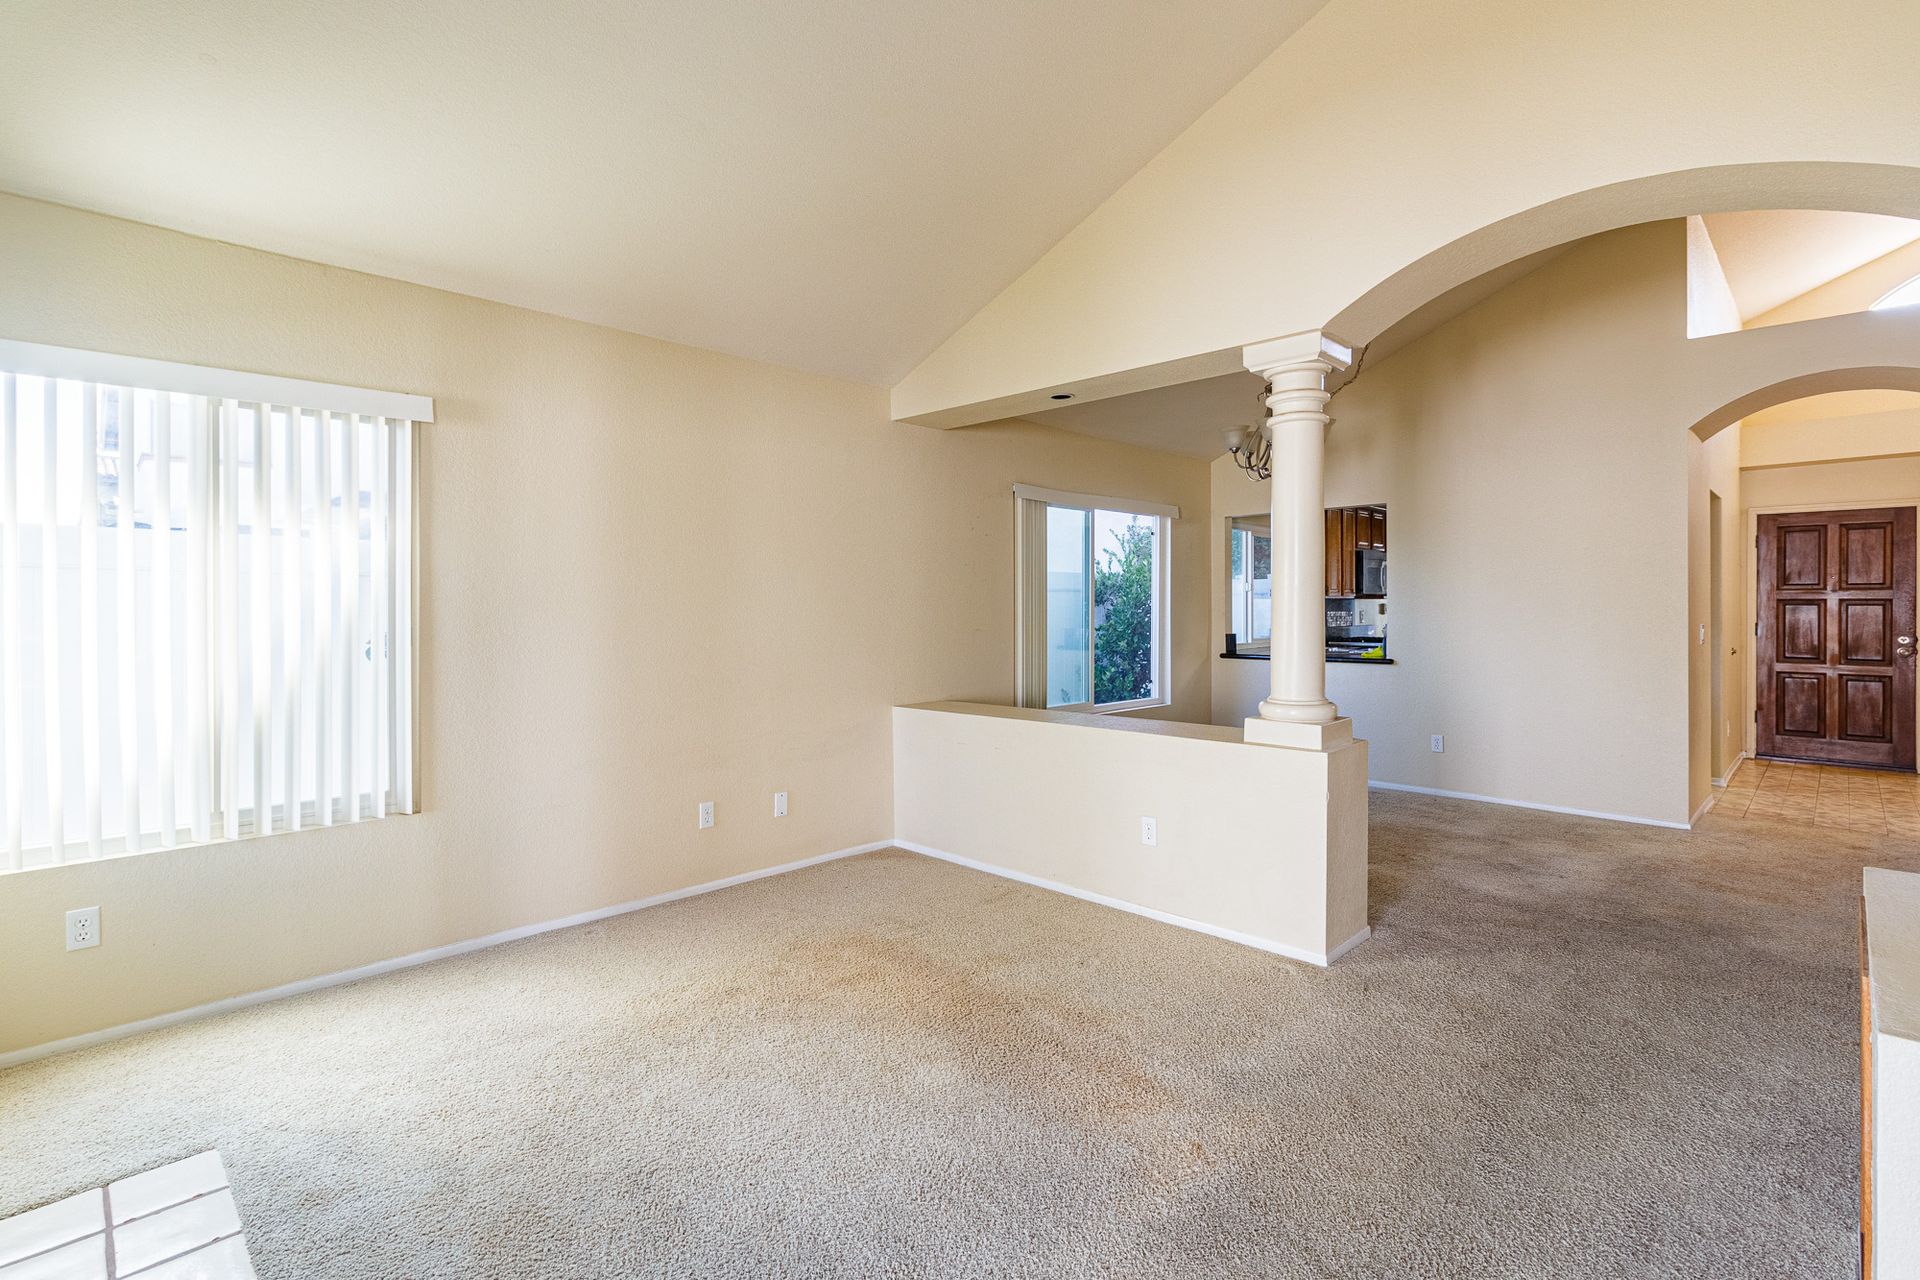 An empty living room with a vaulted ceiling and a carpeted floor.